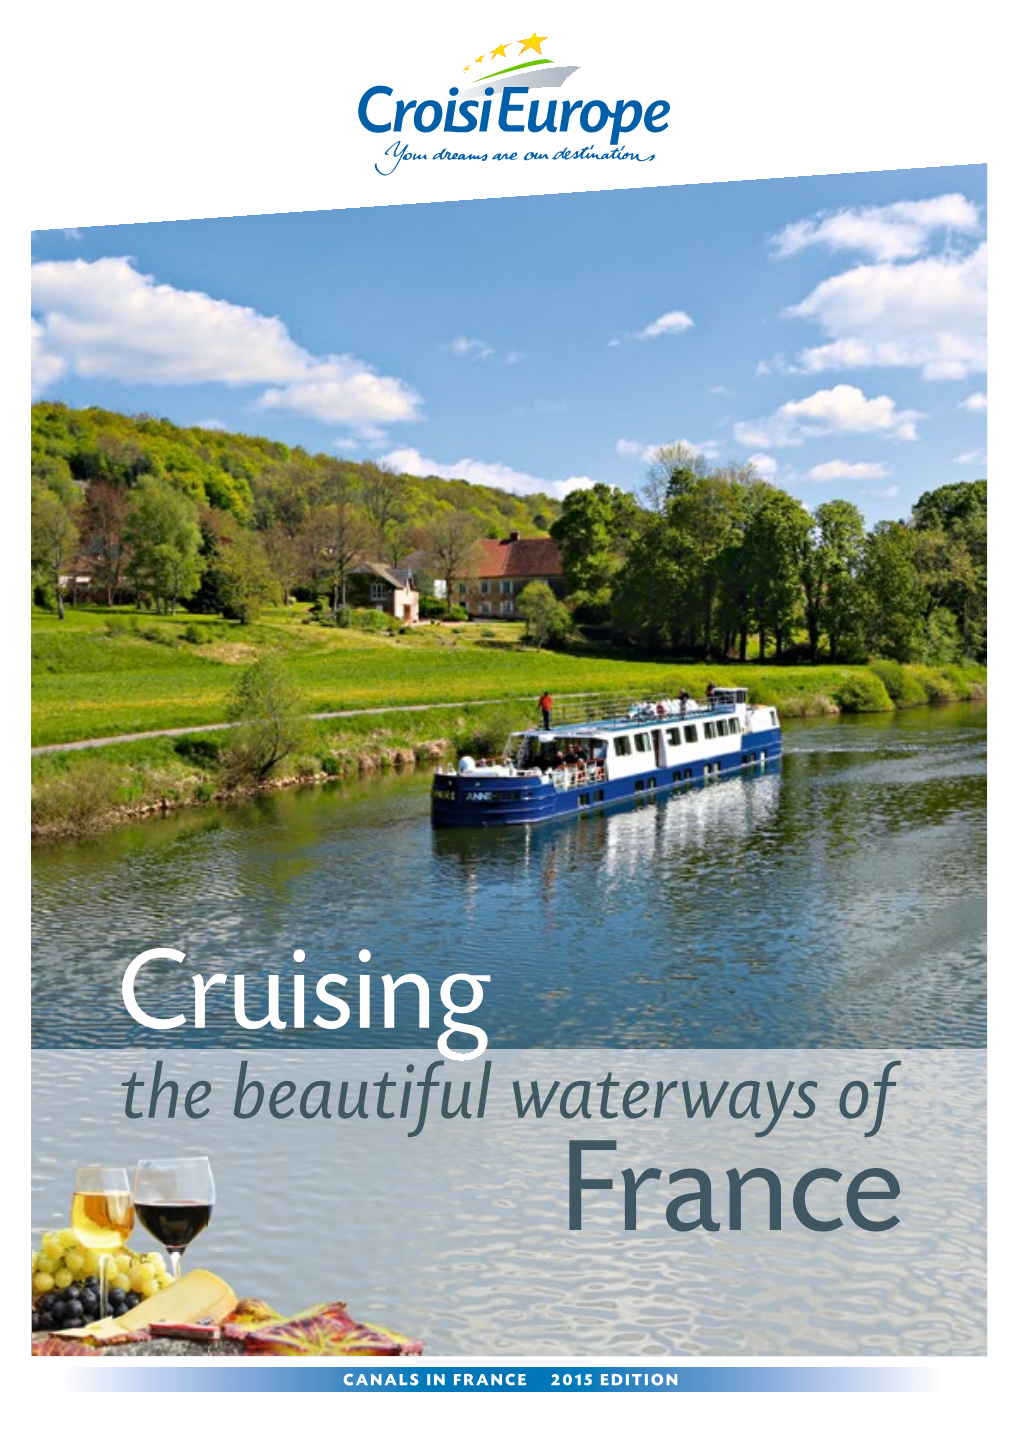 The Beautiful Waterways of France